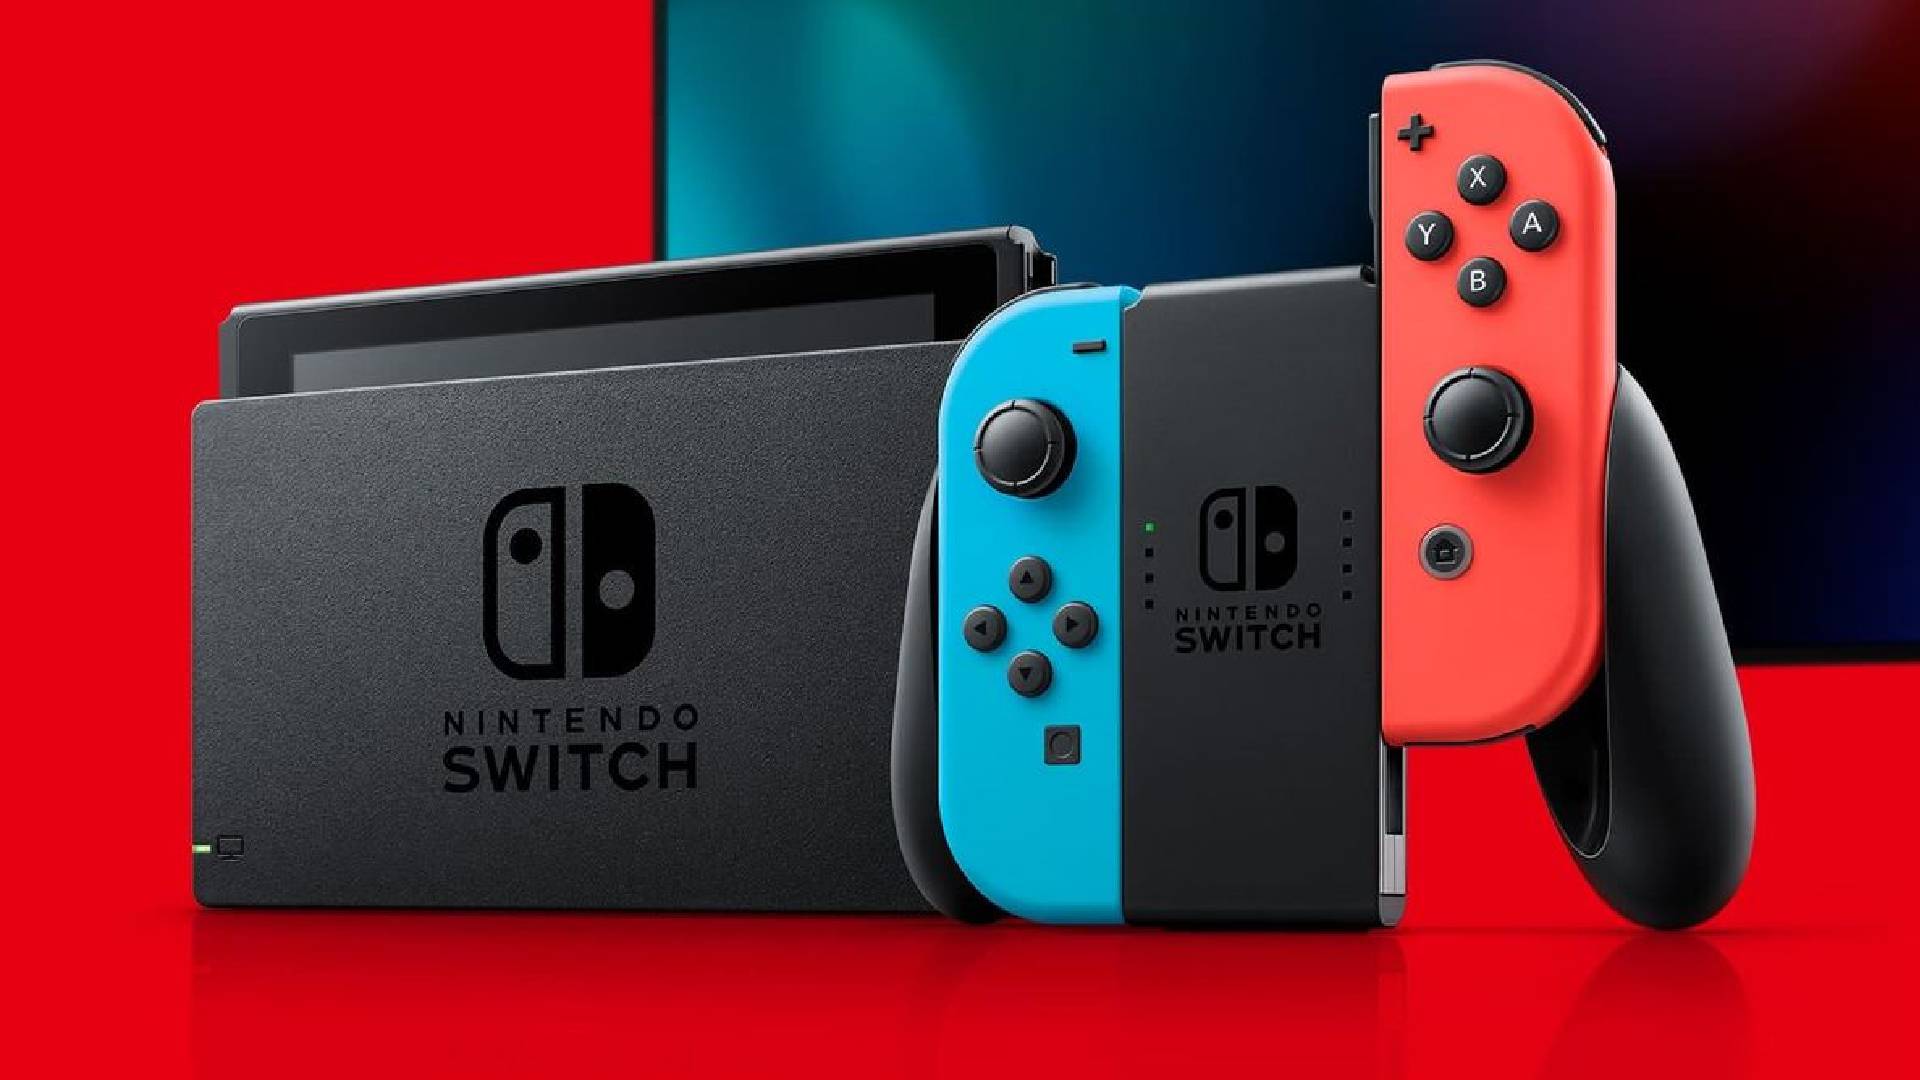 Nintendo Switch gets a price drop in Europe | Pocket Tactics